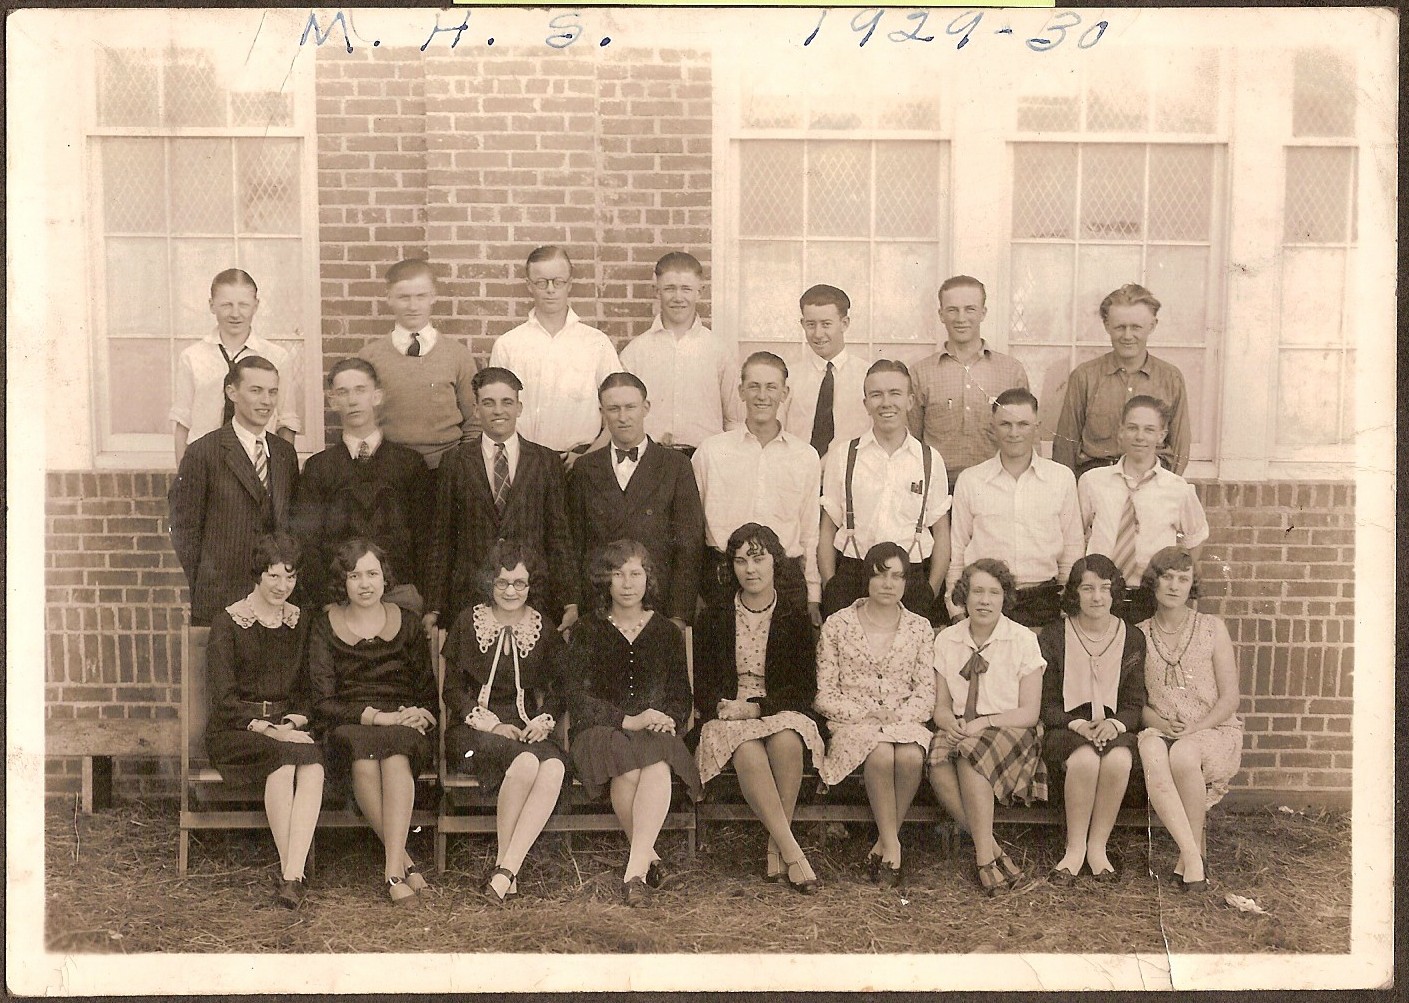 Mullen High School, in Mullen, Nebraska.  Class of 1930.

My grandmother, Bertha (Phillips) Richard, is the 5th from the left in the first row.